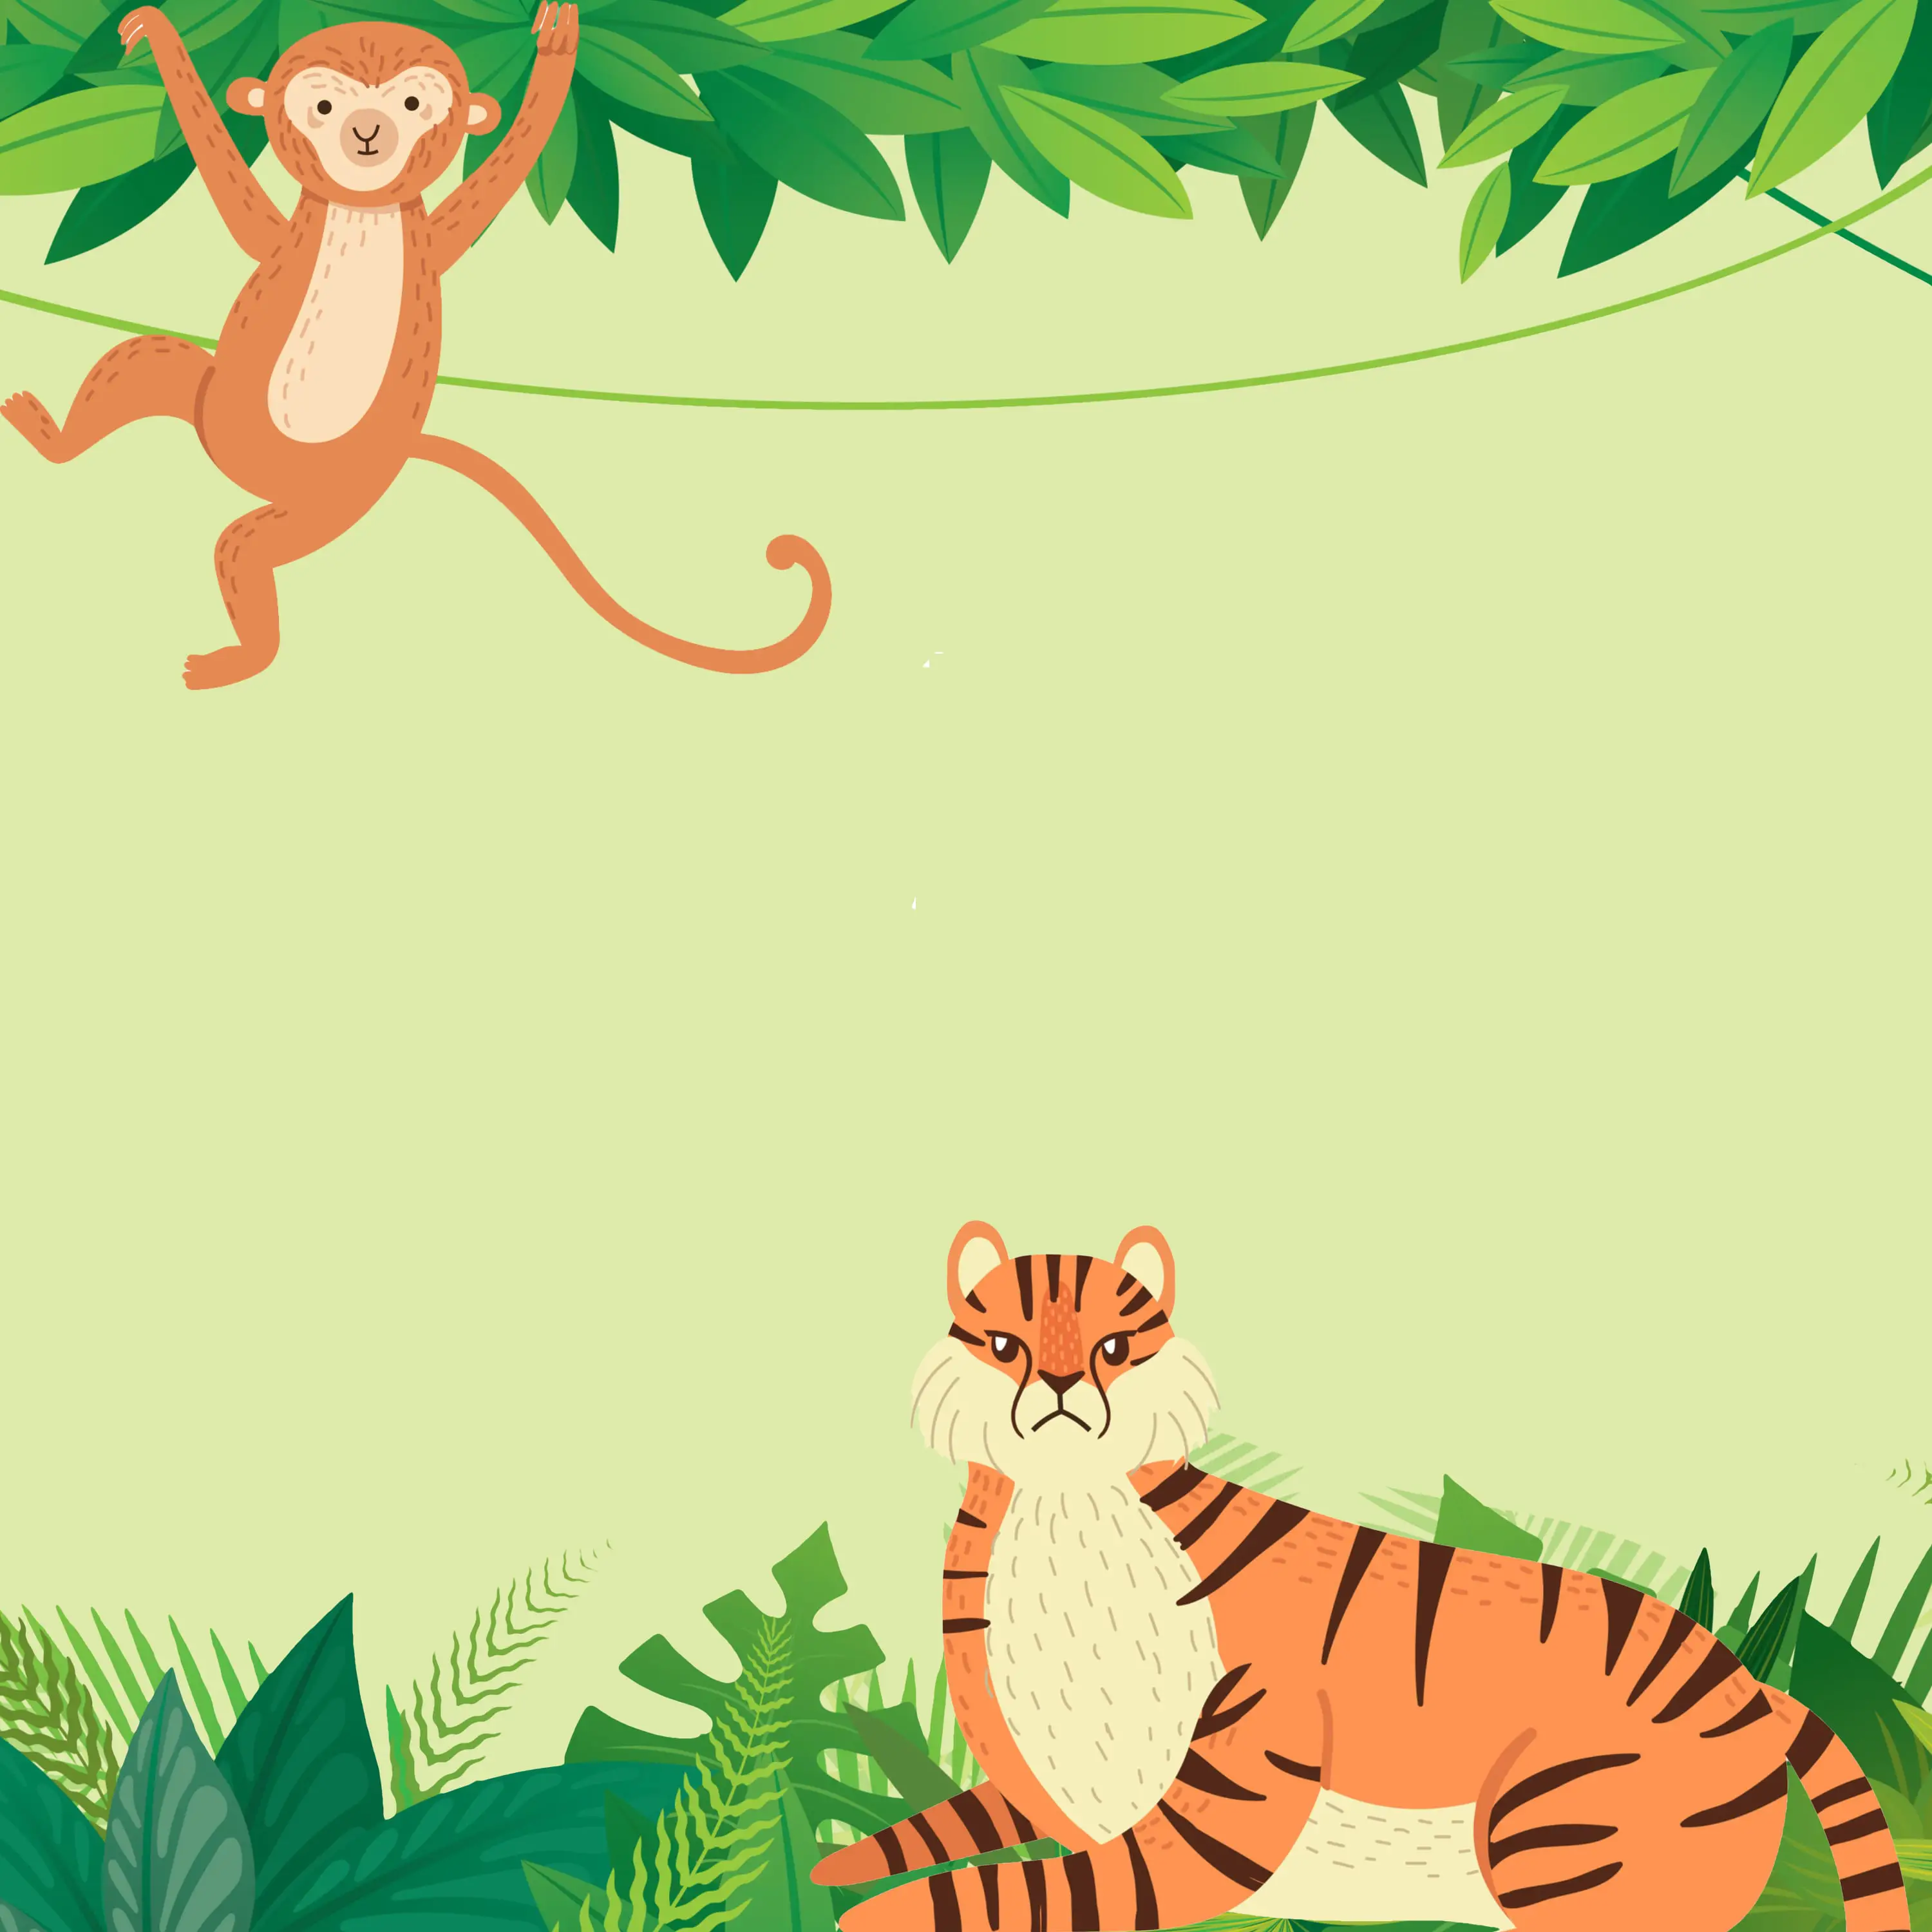 How the Monkey Tricked the Tiger - Storynory